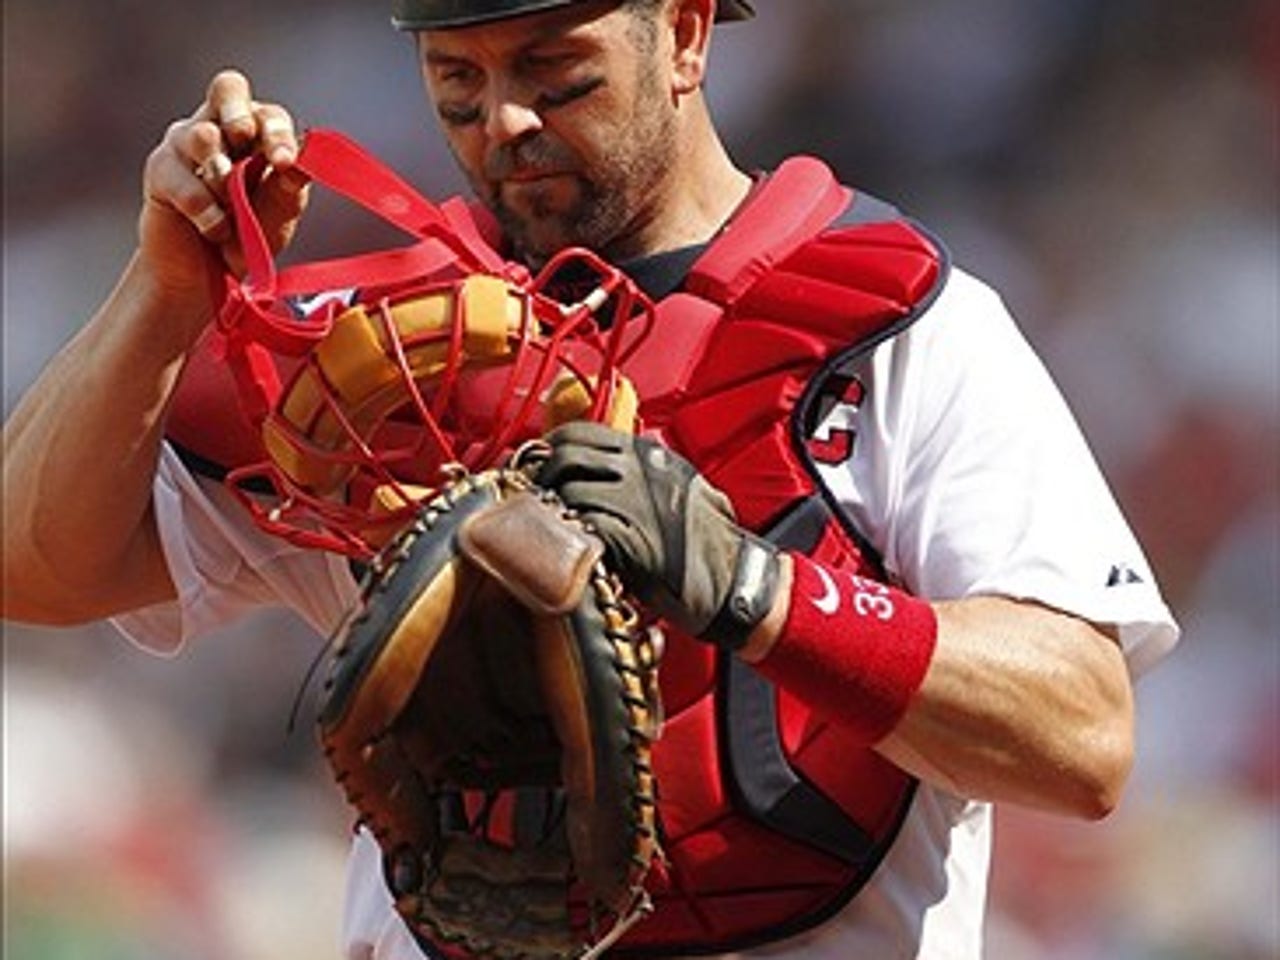 Pawtucket Red Sox - On this date in 2004, Jason Varitek signed a